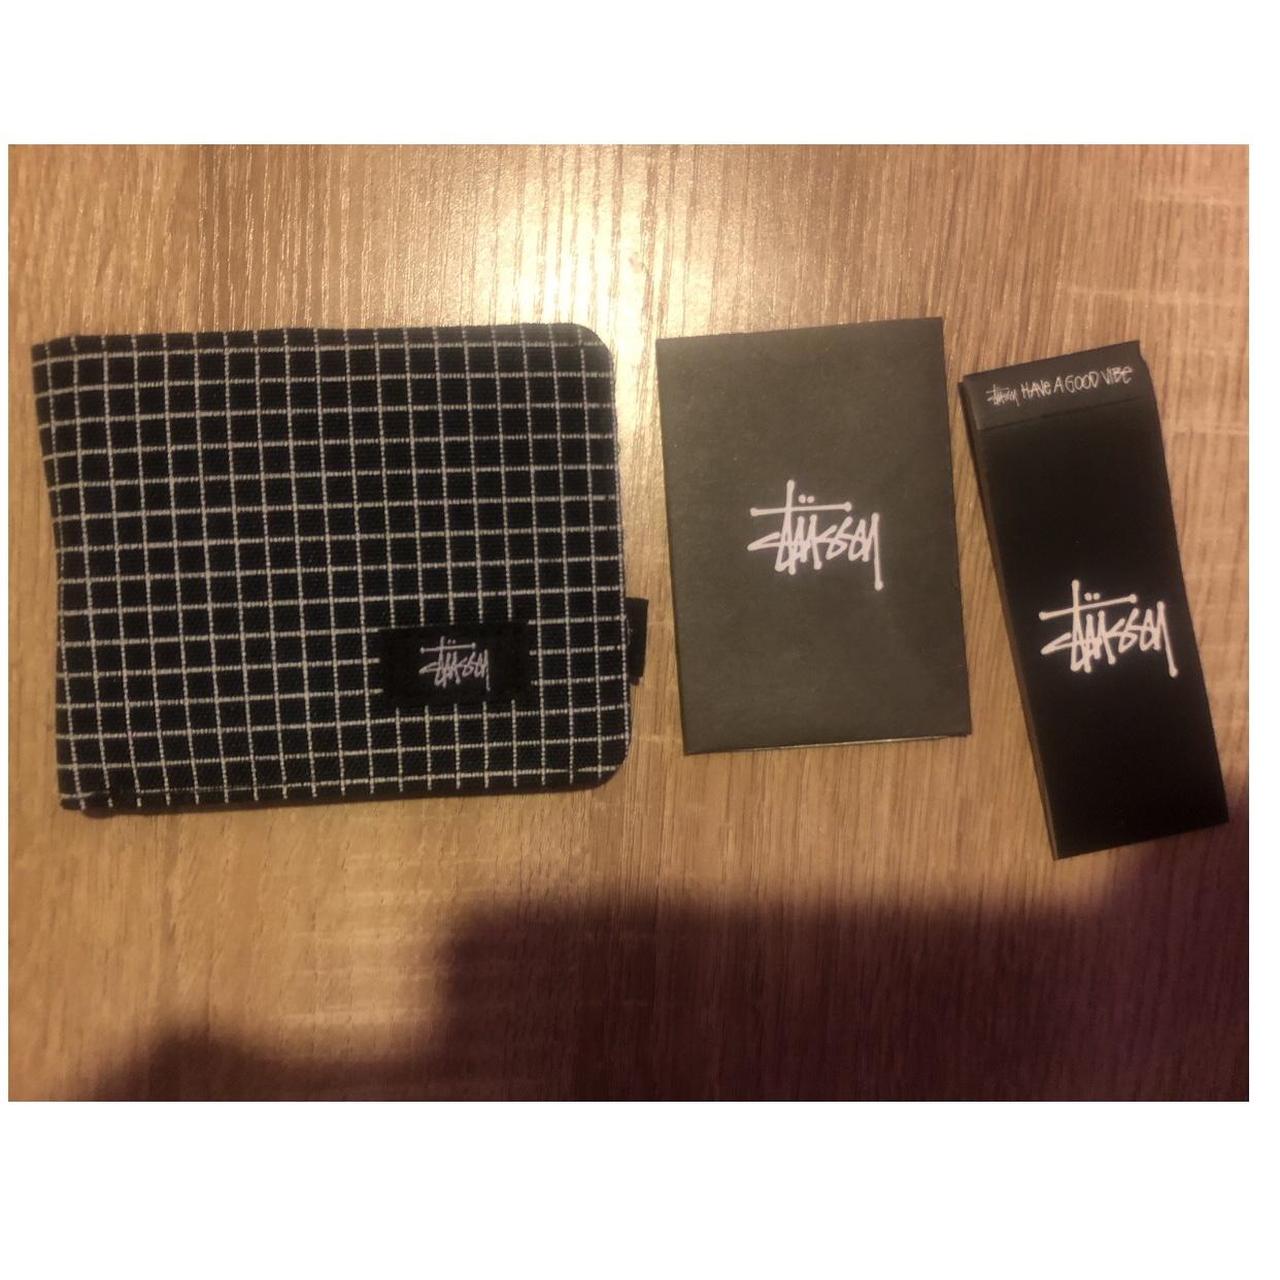 Stussy Wallet Features a grid pattern all over the... - Depop